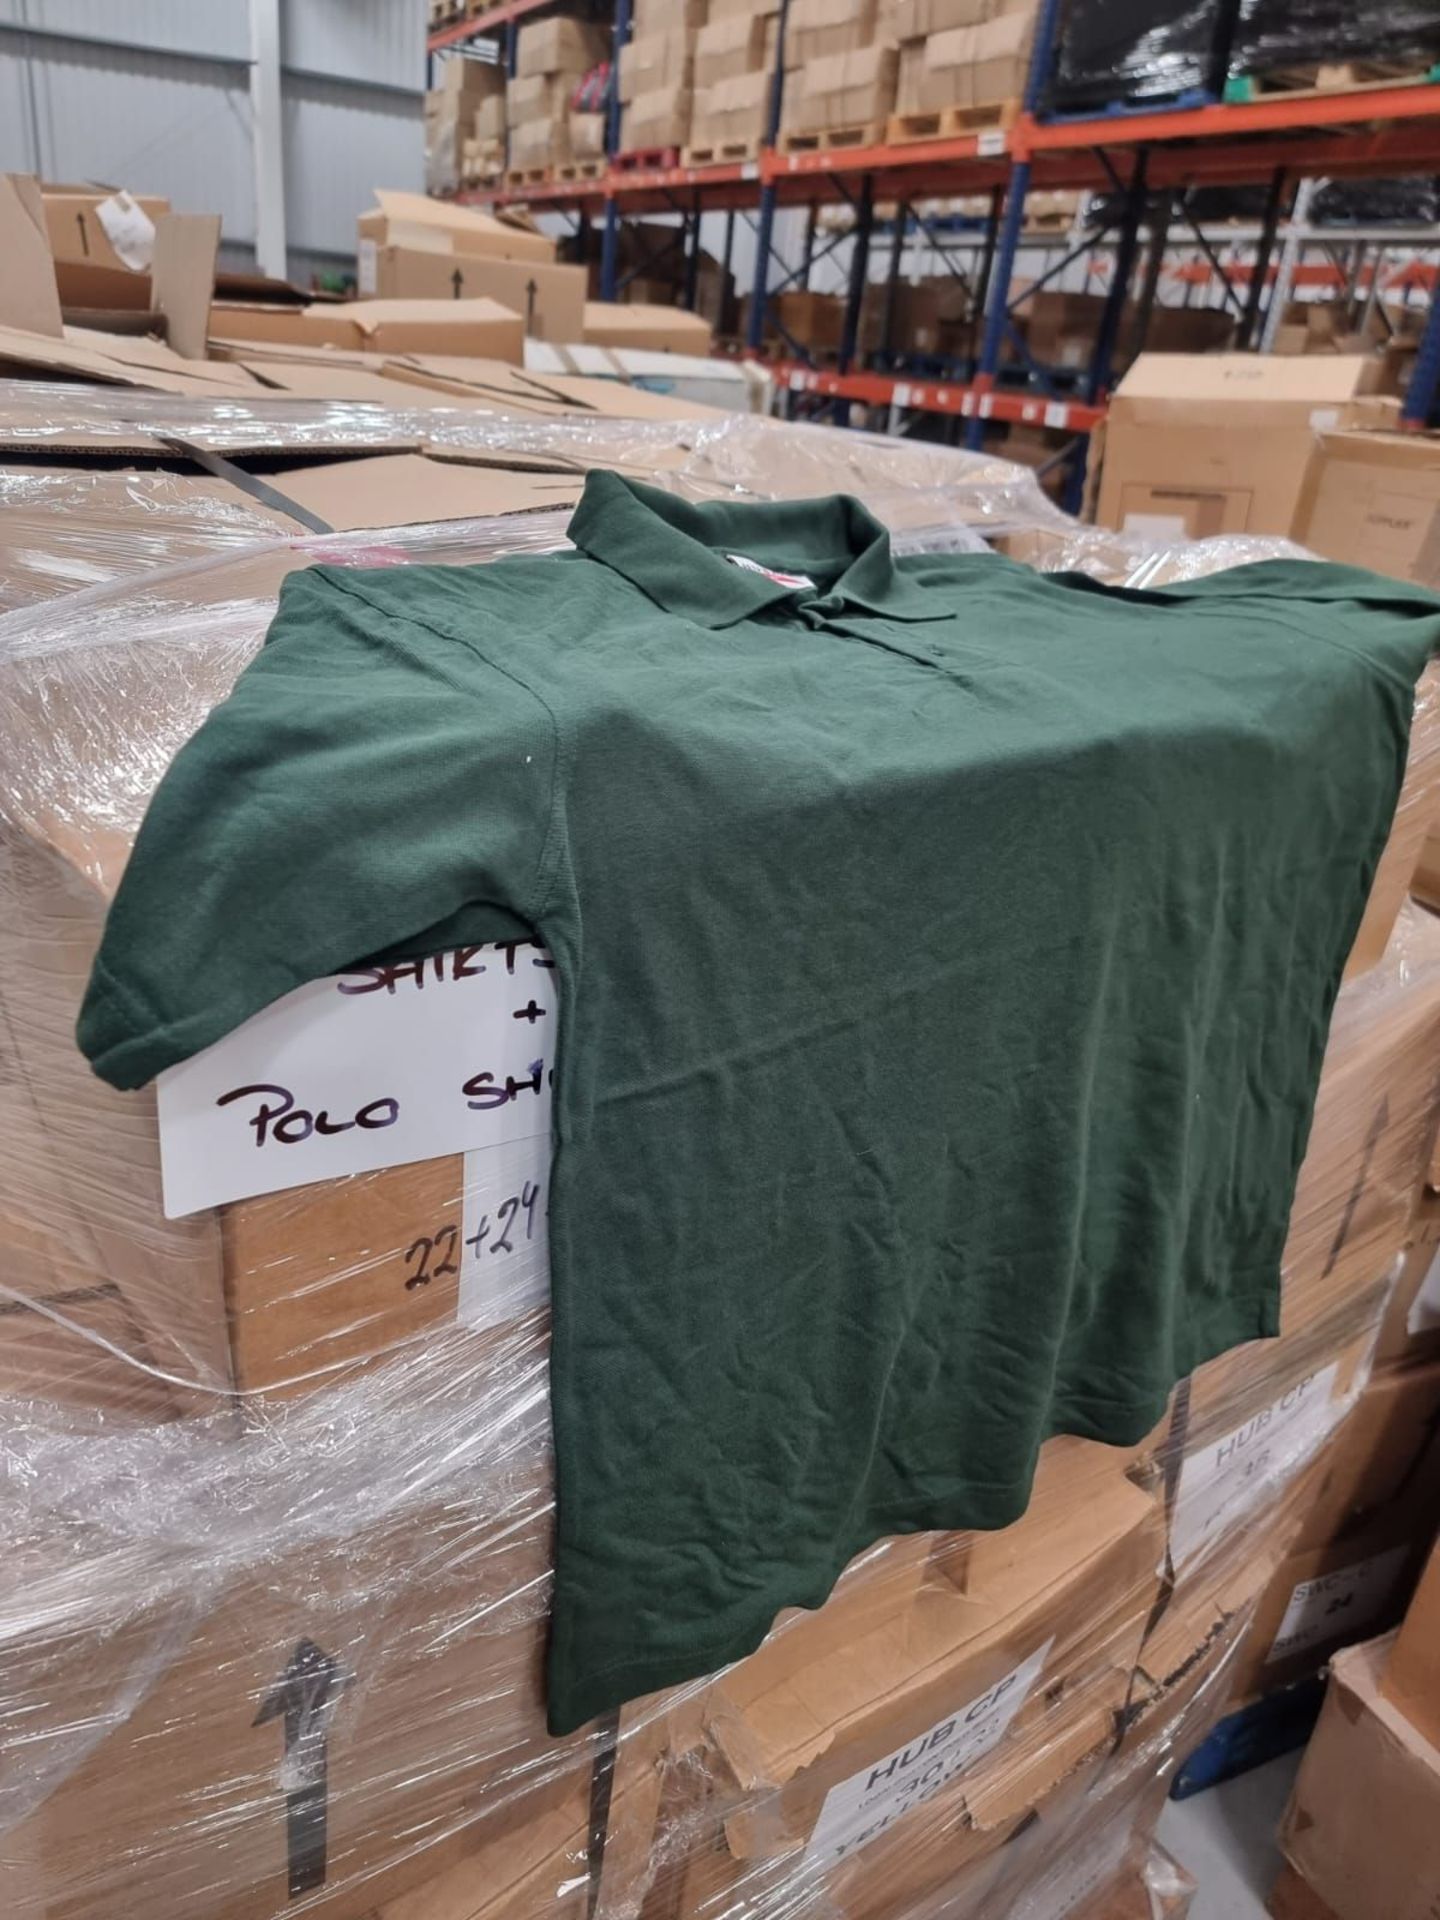 PALLET TO CONTAIN A LARGE QUANTITY OF NEW CLOTHING GOODS. MAY INCLUDE ITEMS SUCH AS: T-SHIRTS, - Image 28 of 28